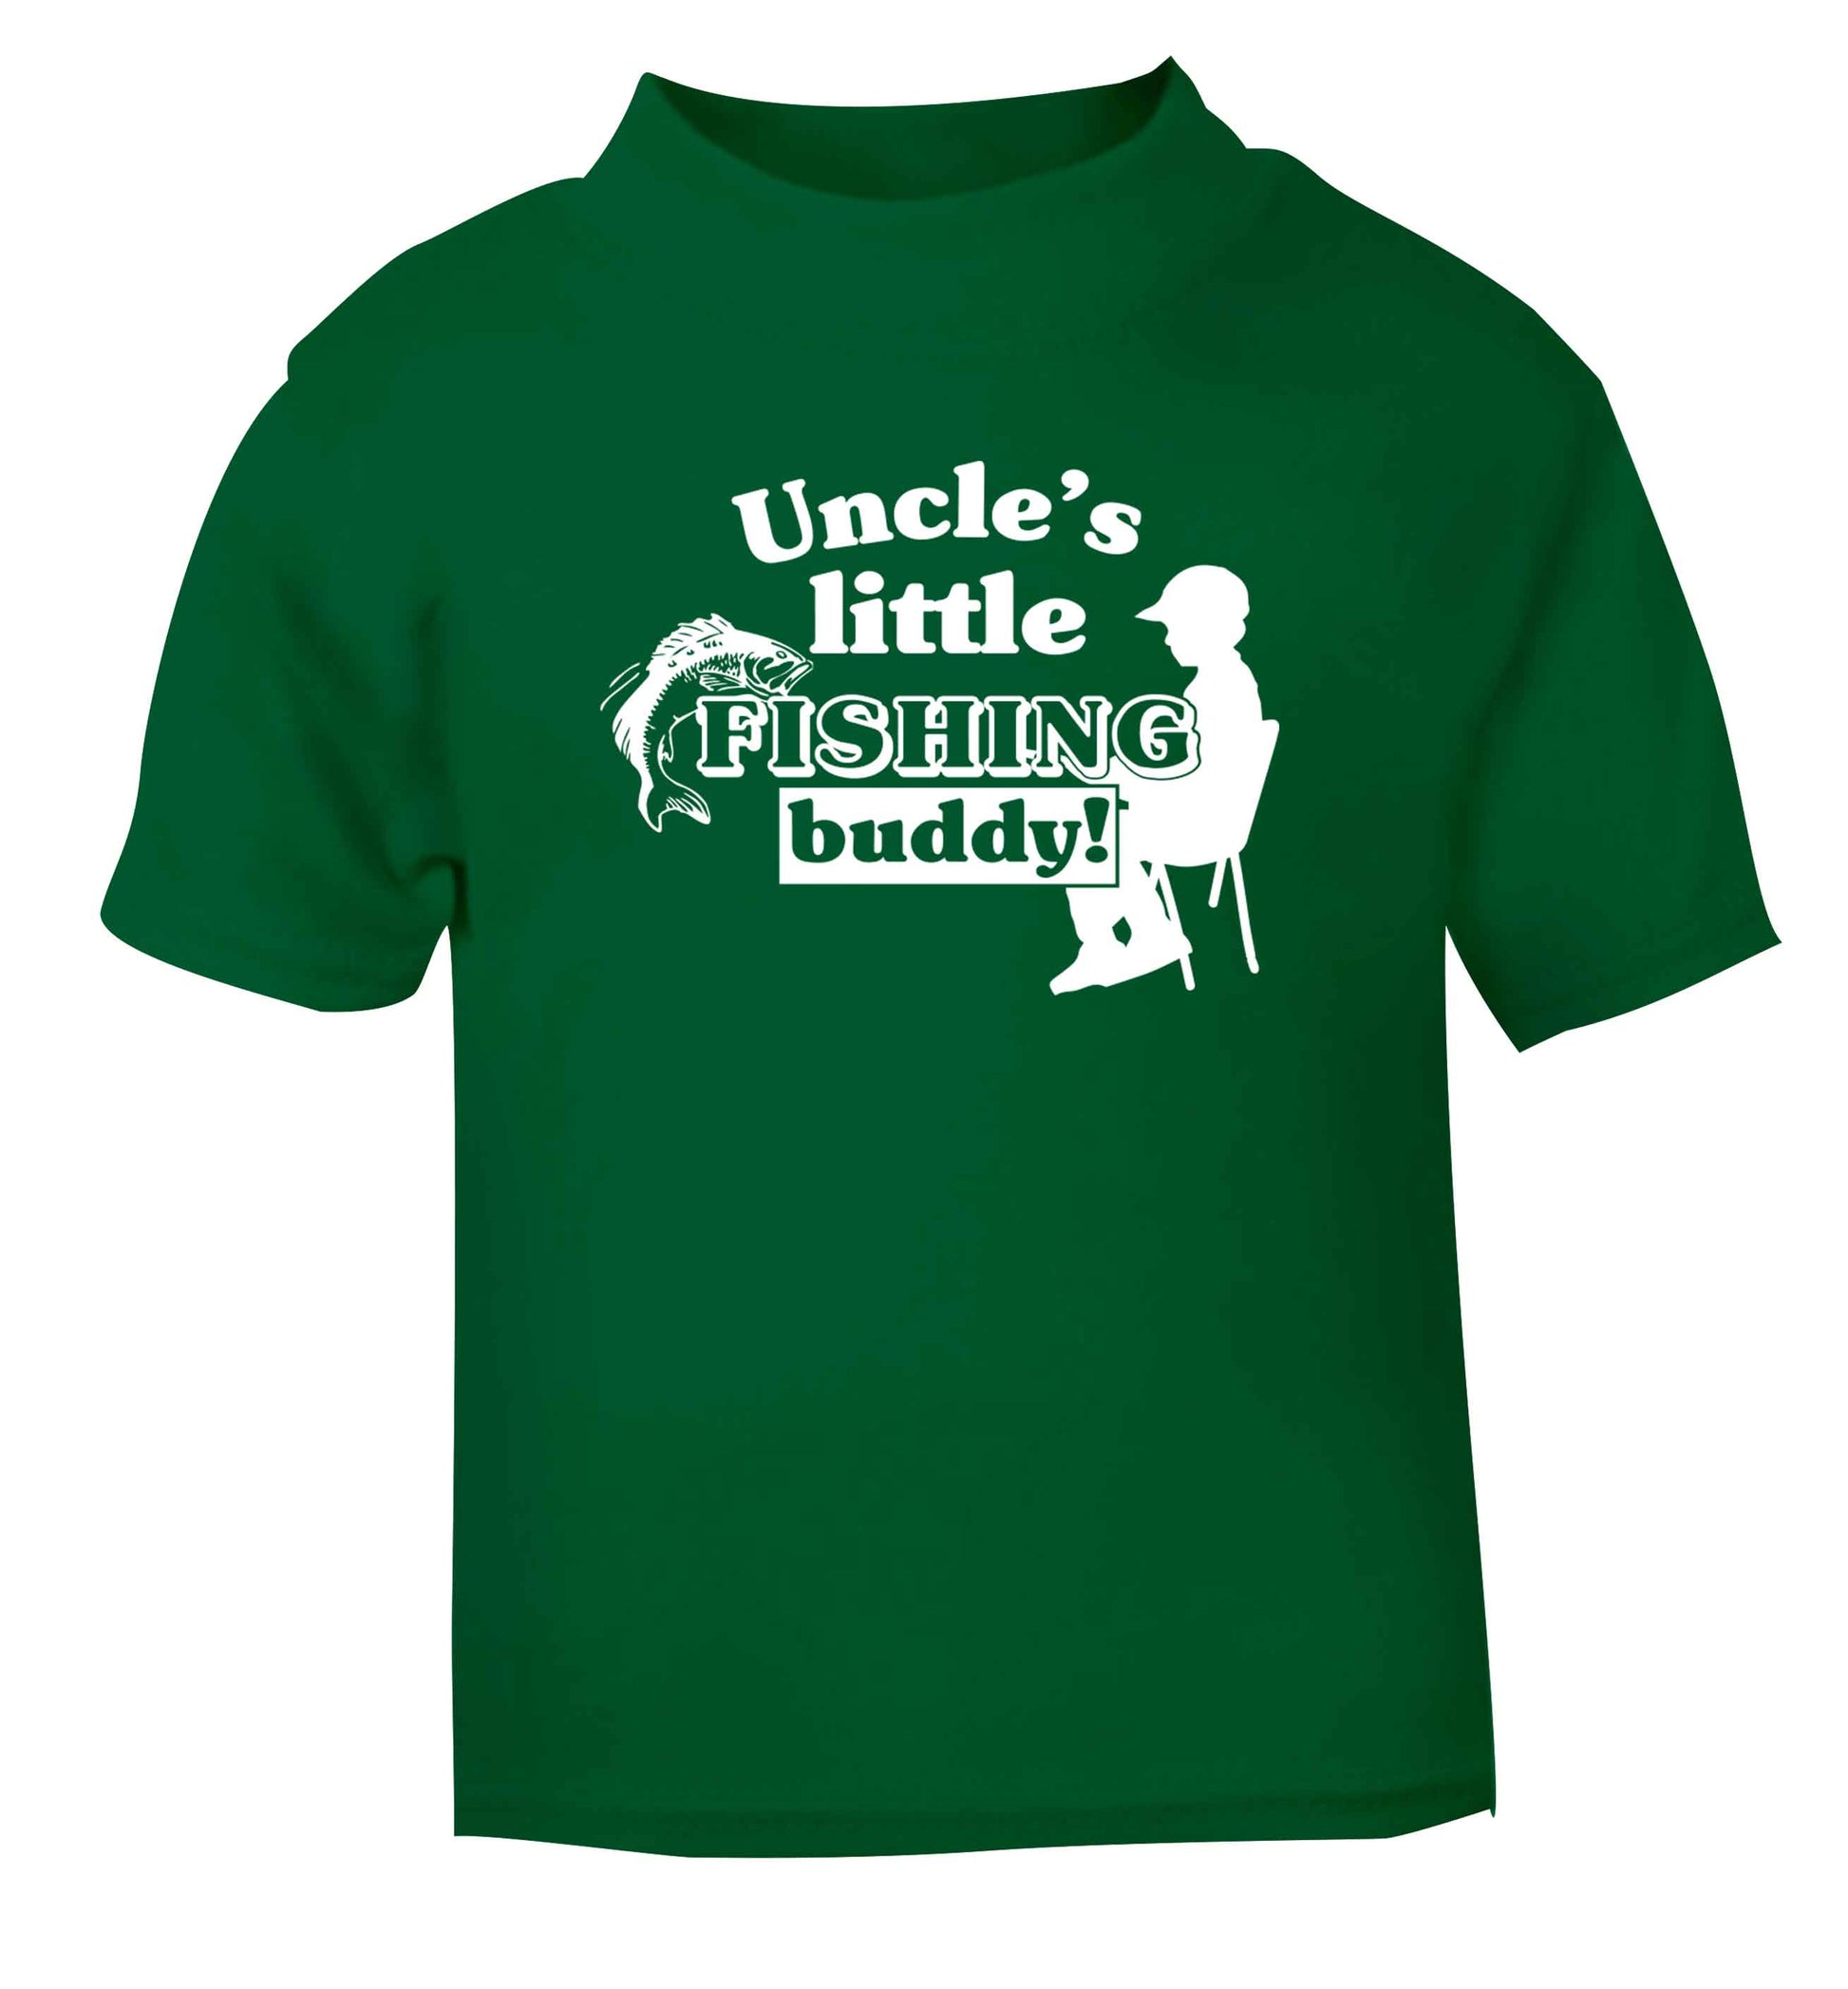 Uncle's little fishing buddy green Baby Toddler Tshirt 2 Years